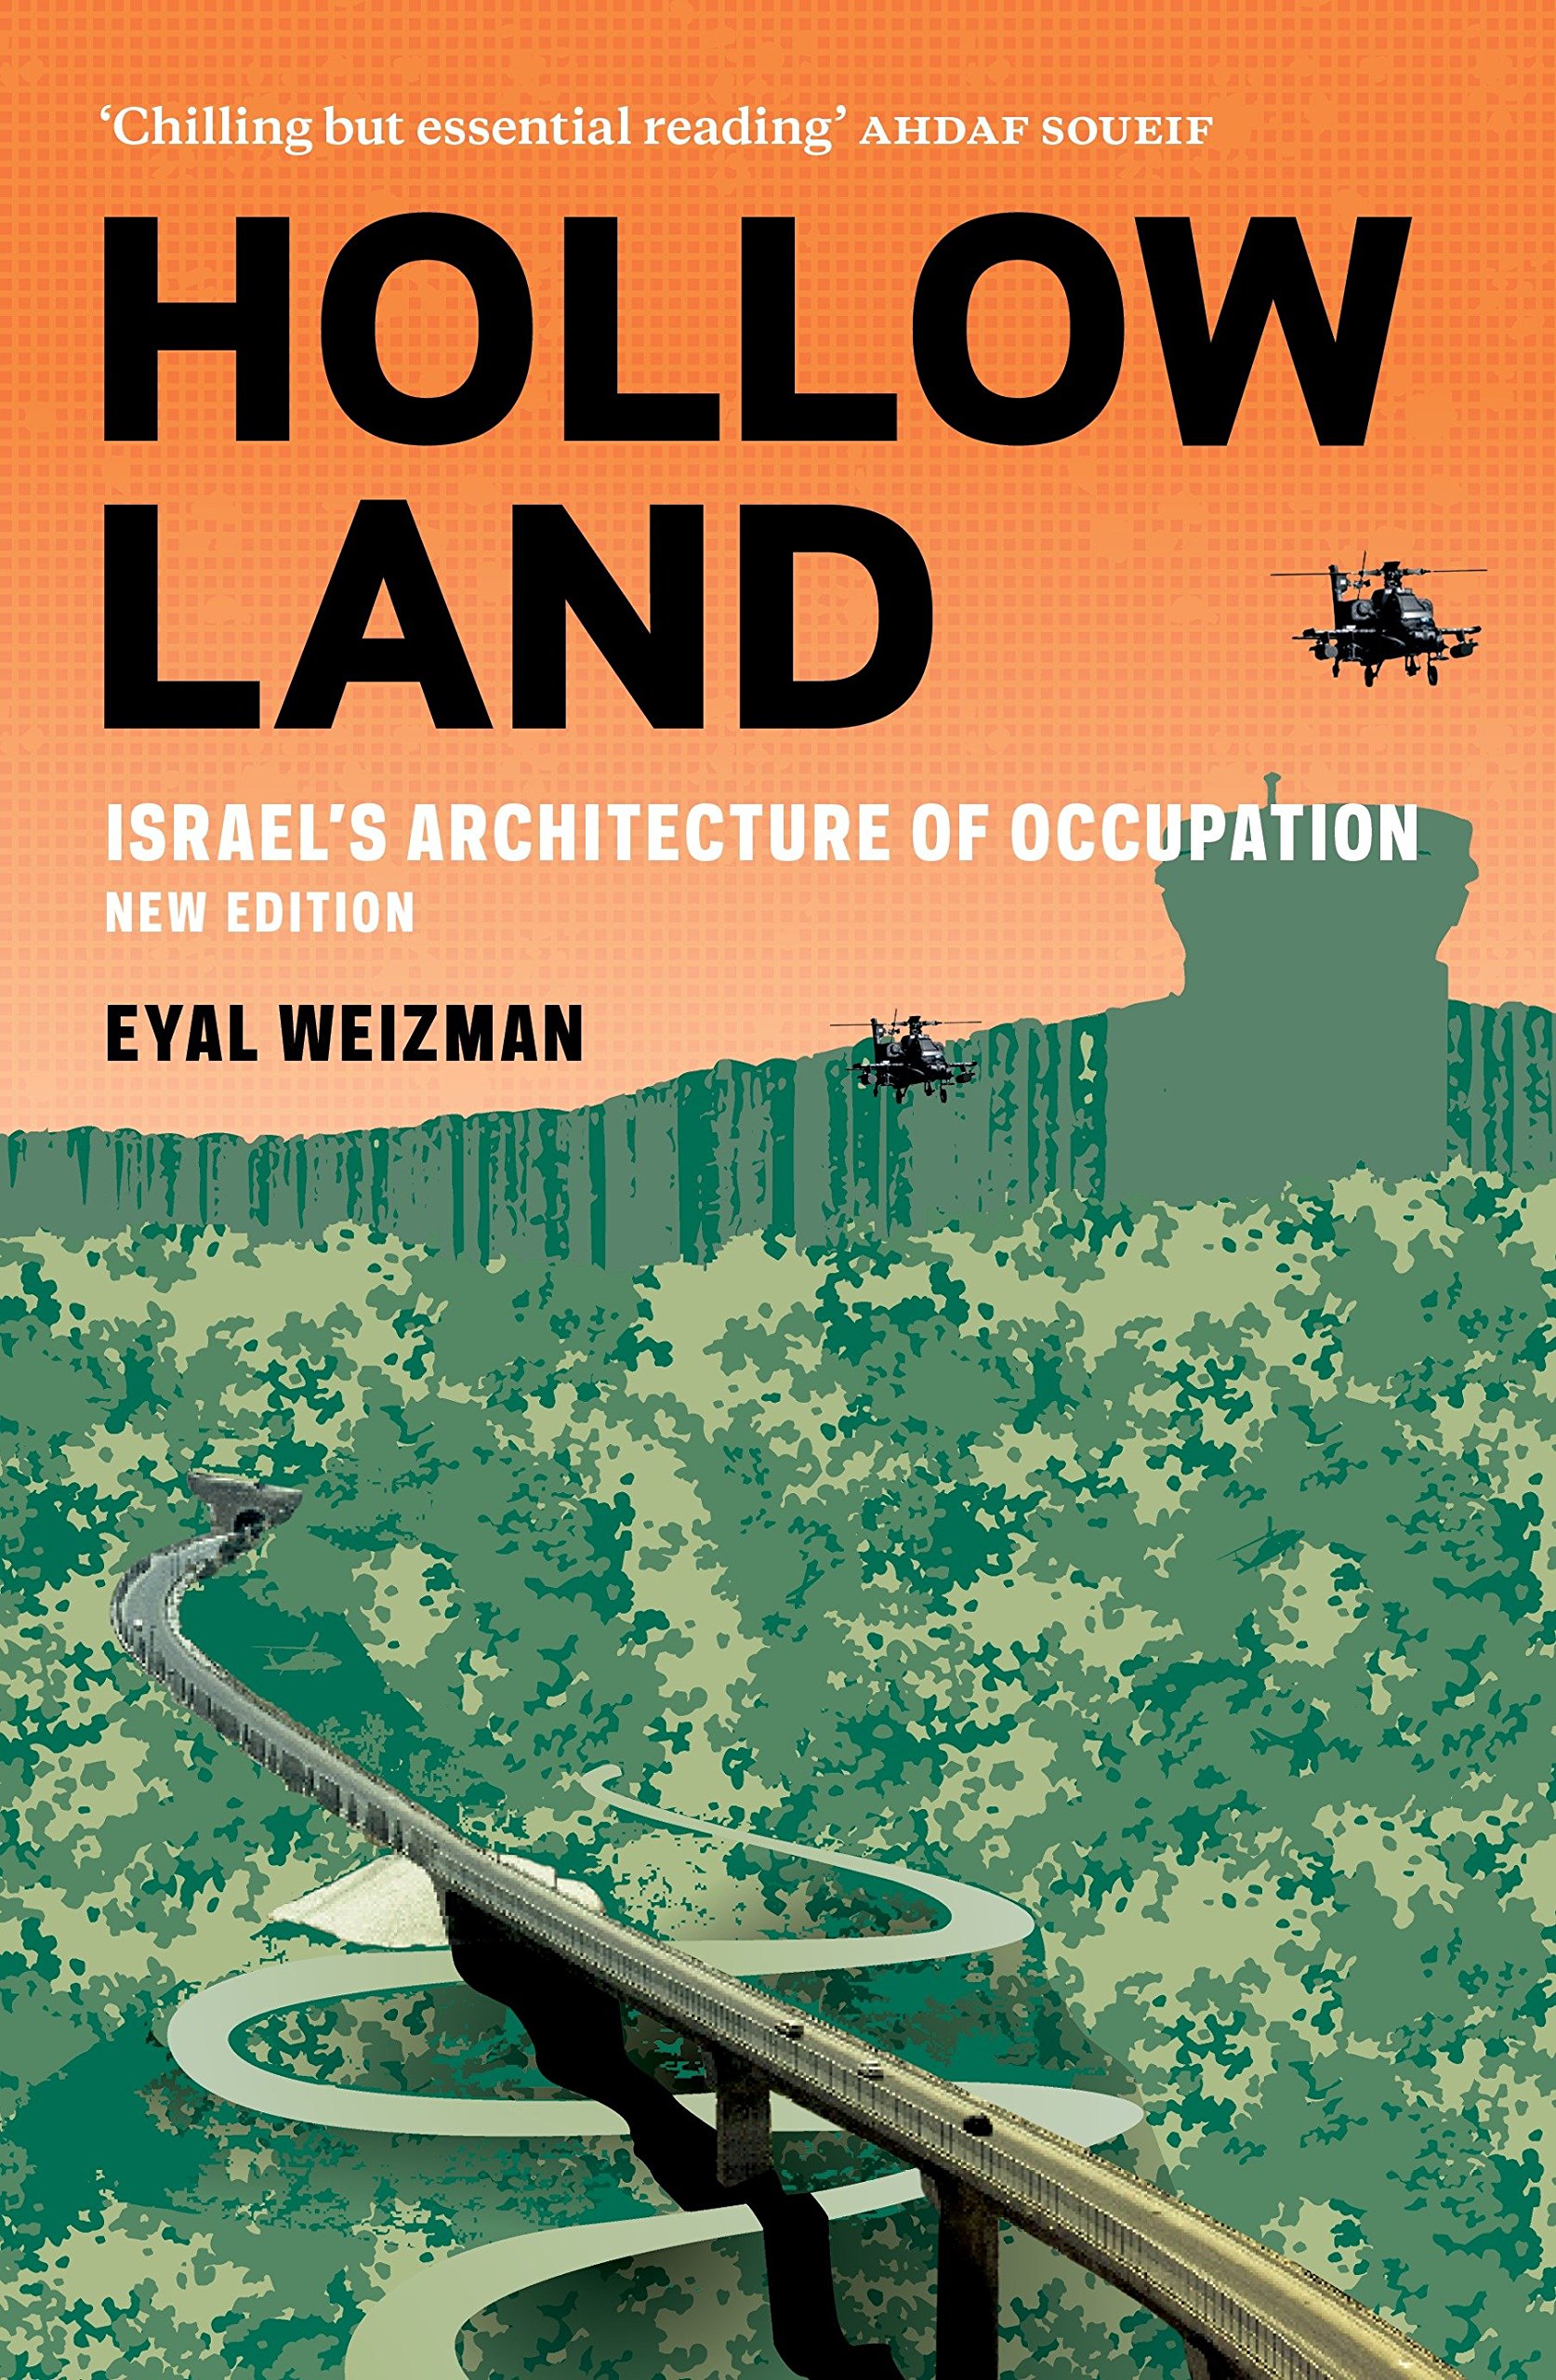 hollow land: israel's architecture of occupation